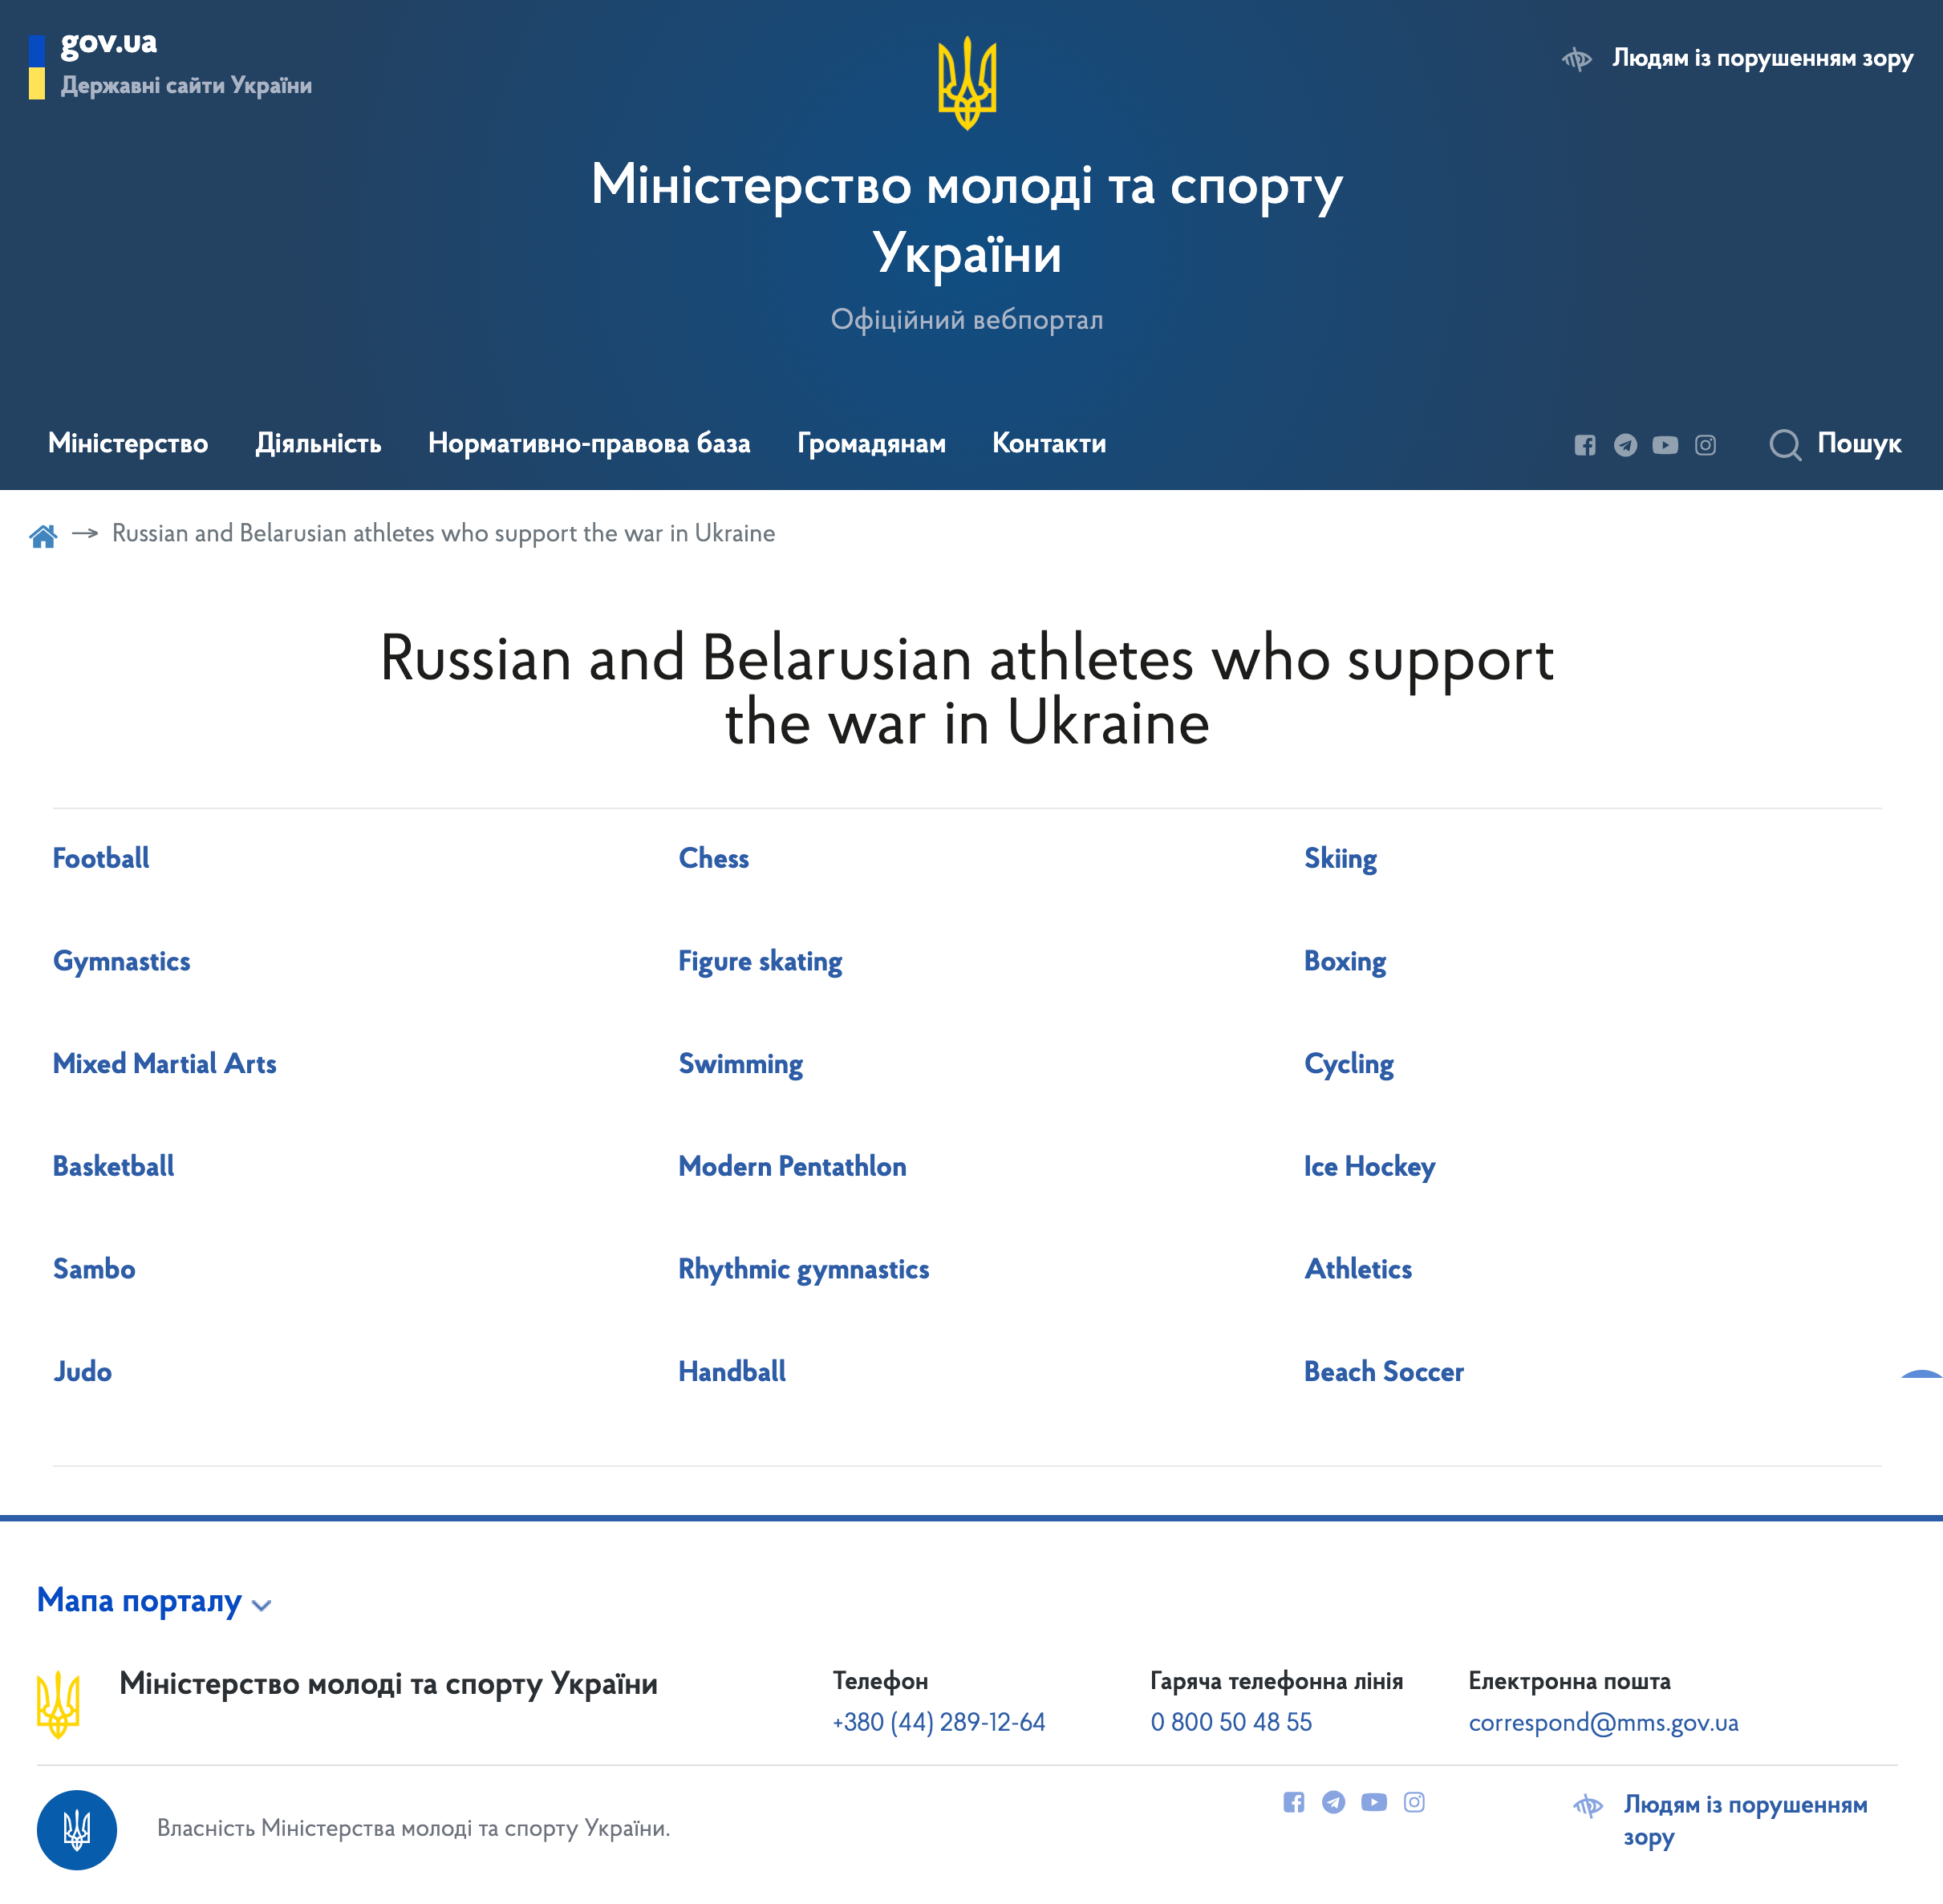 Фото: mms.gov.ua/russian-and-belarusian-athletes-who-support-the-war-in-ukraine